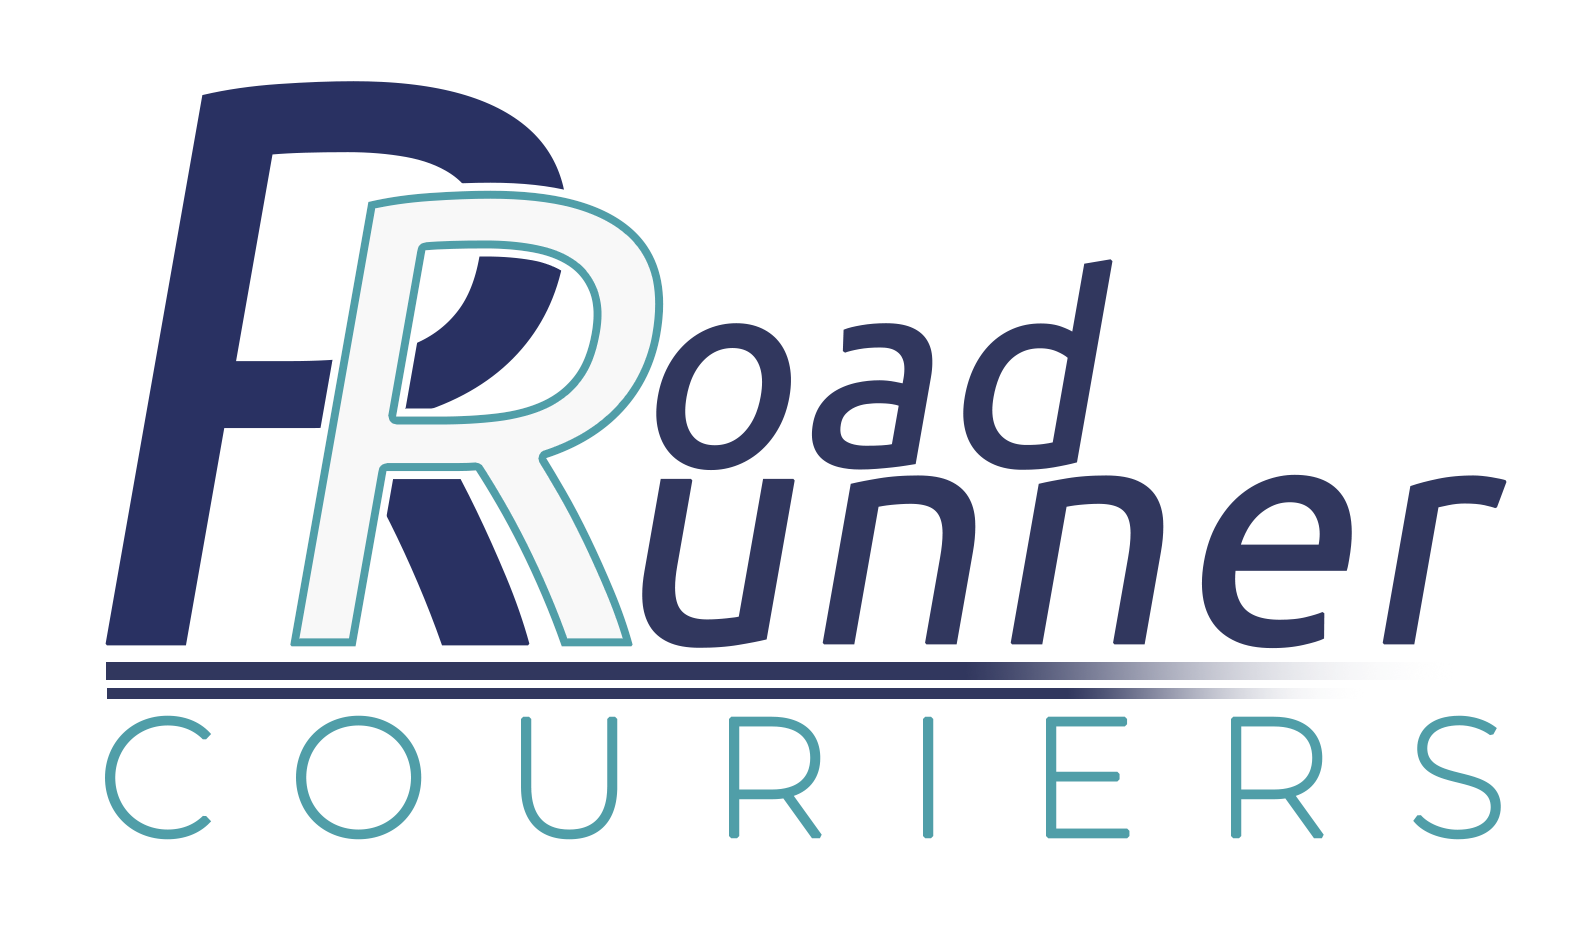 The Road Runner Couriers 2